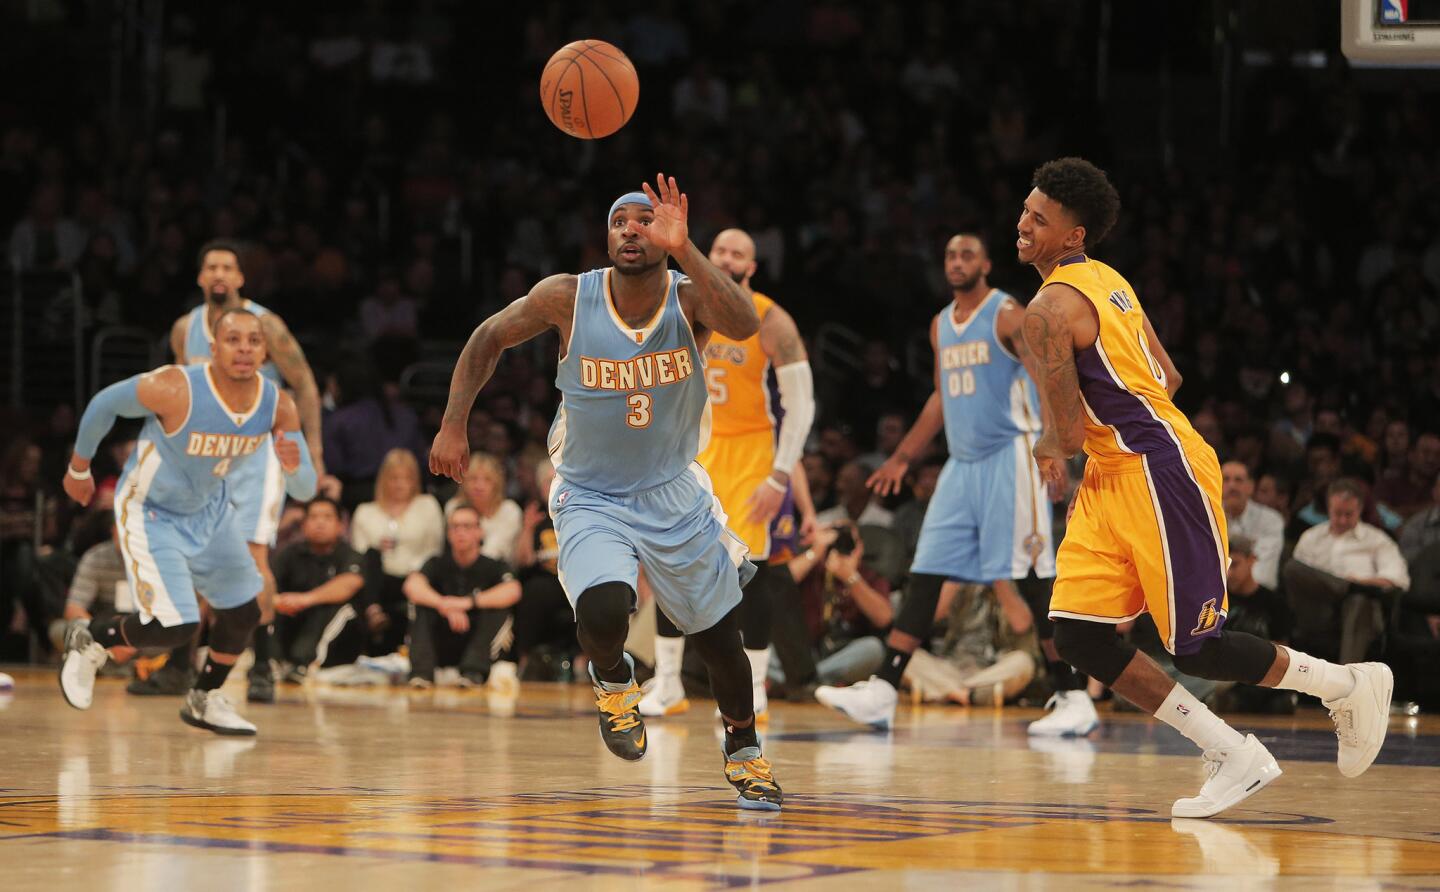 Denver guard Ty Lawson steals the ball from Nick Young late in the fourth quarter of the Lakers' 106-96 loss to the Nuggets at Staples Center.